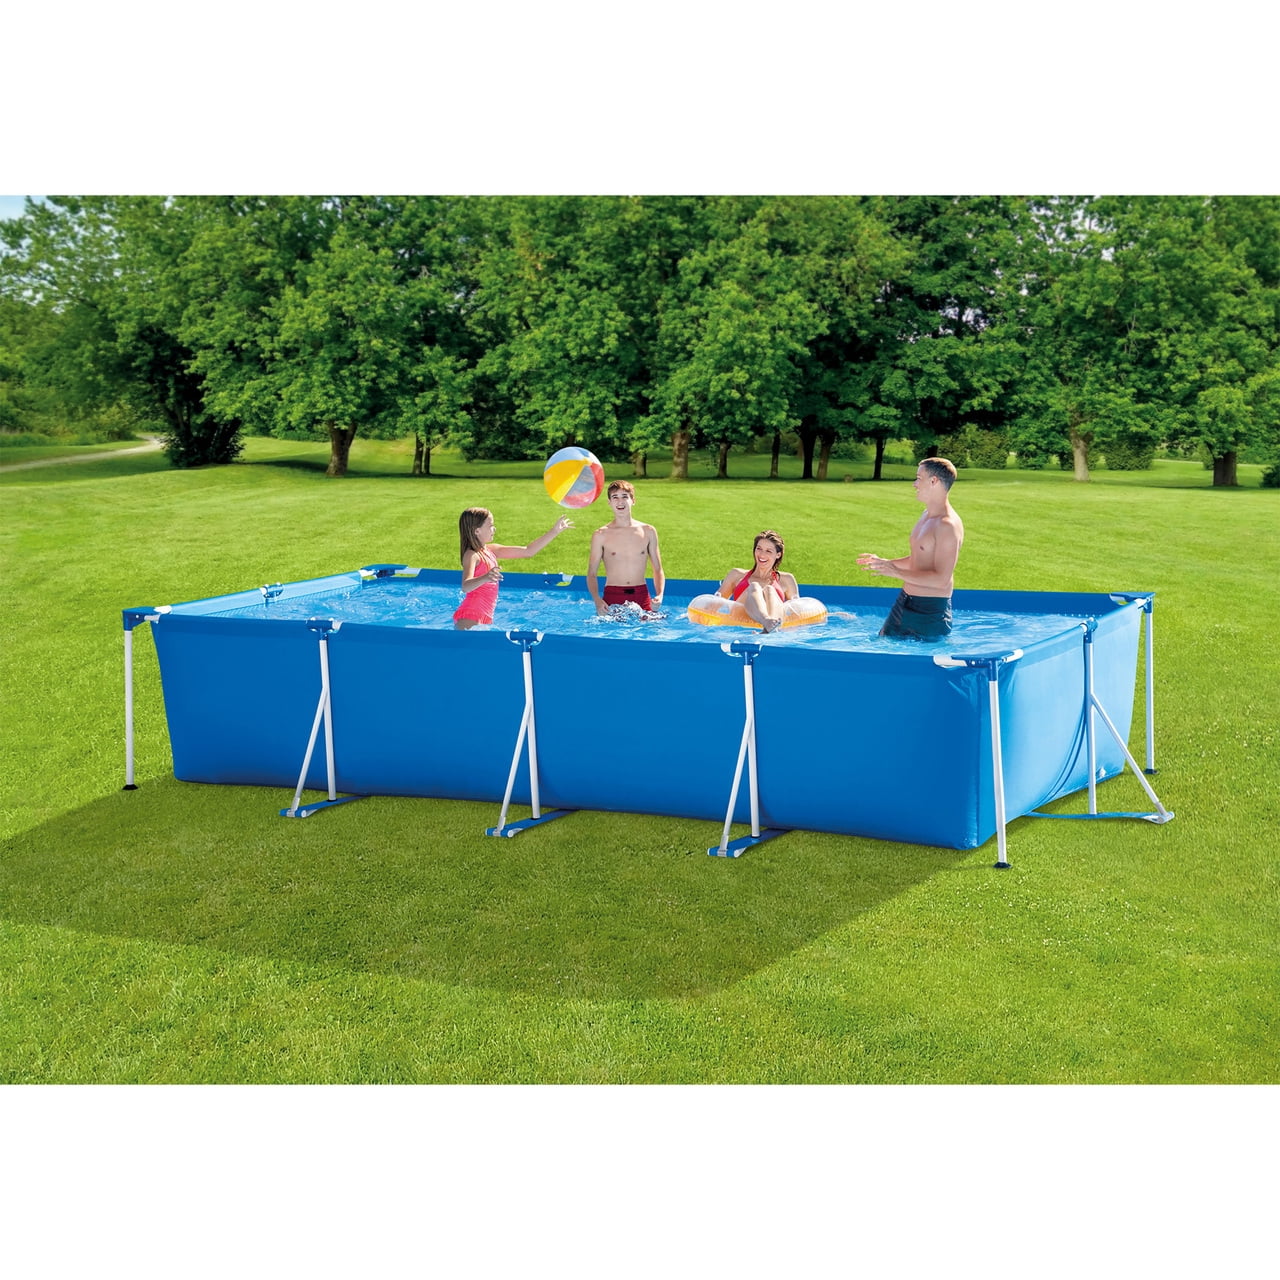 Pool Central X Rectangular Frame Above Ground Swimming Pool, 51% OFF